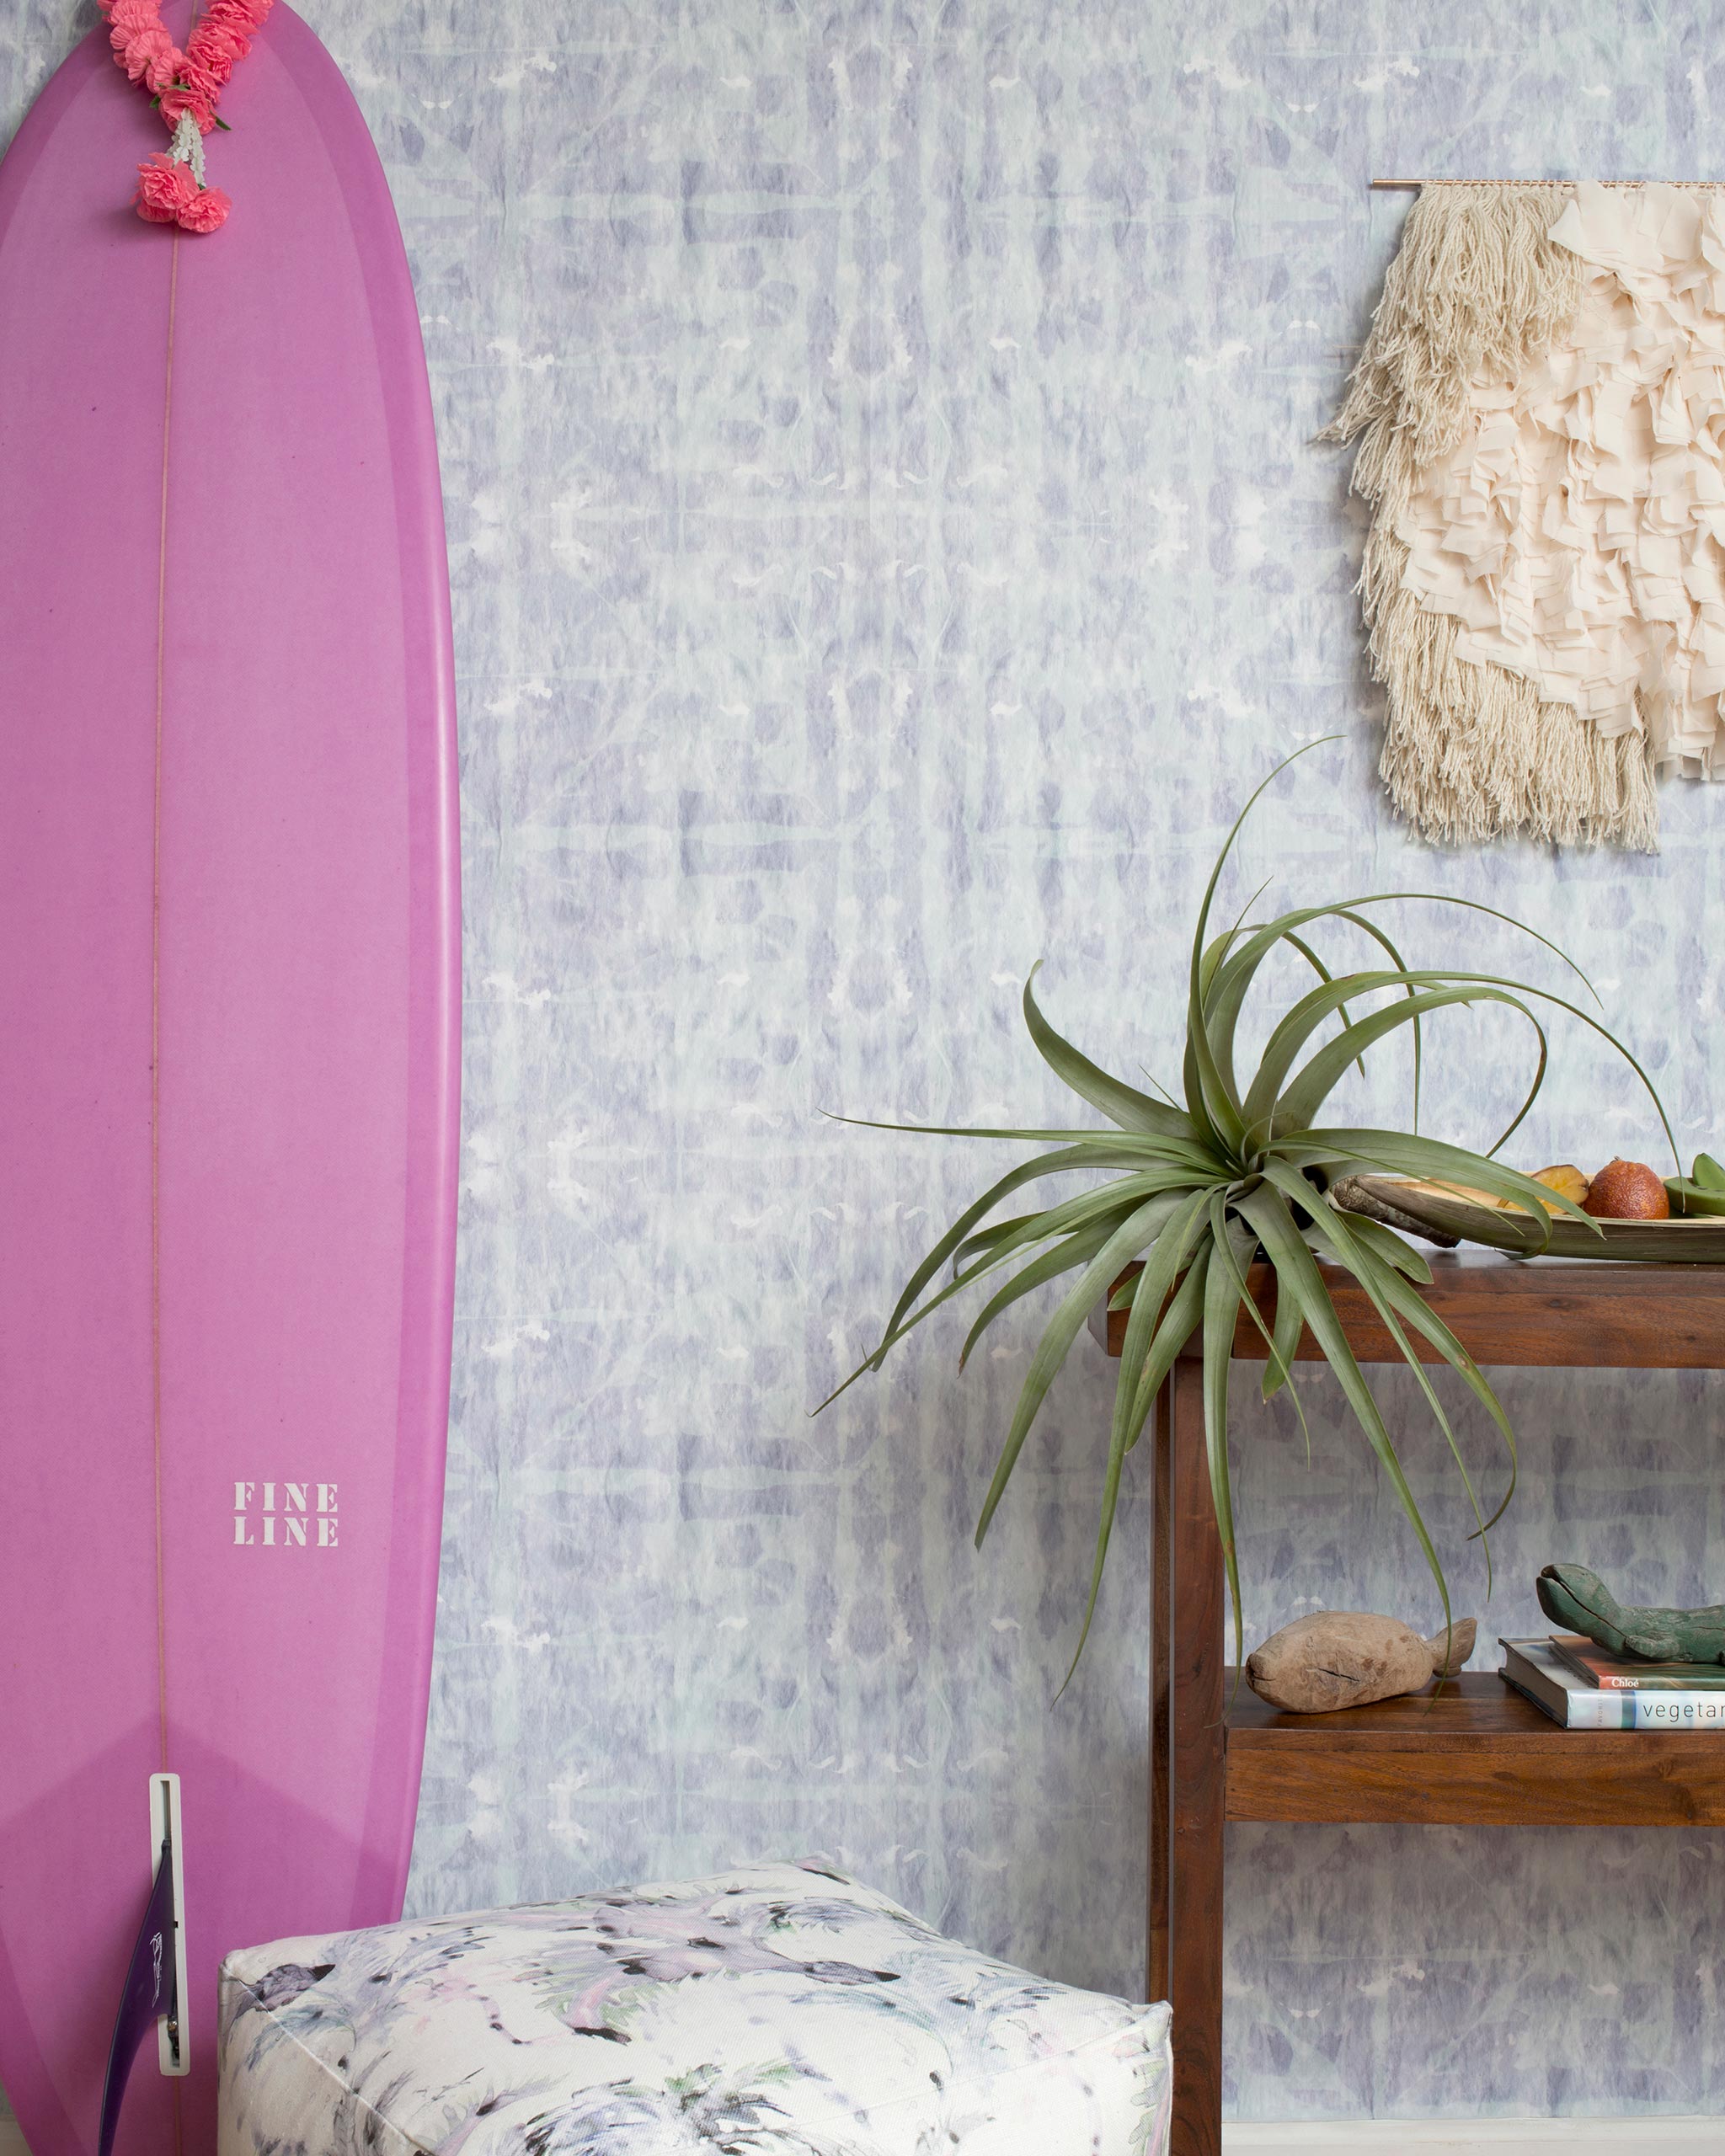 A maximalist room tableau with a purple surfboard and wall papered in an abstract dyed grid print in purple and turquoise.